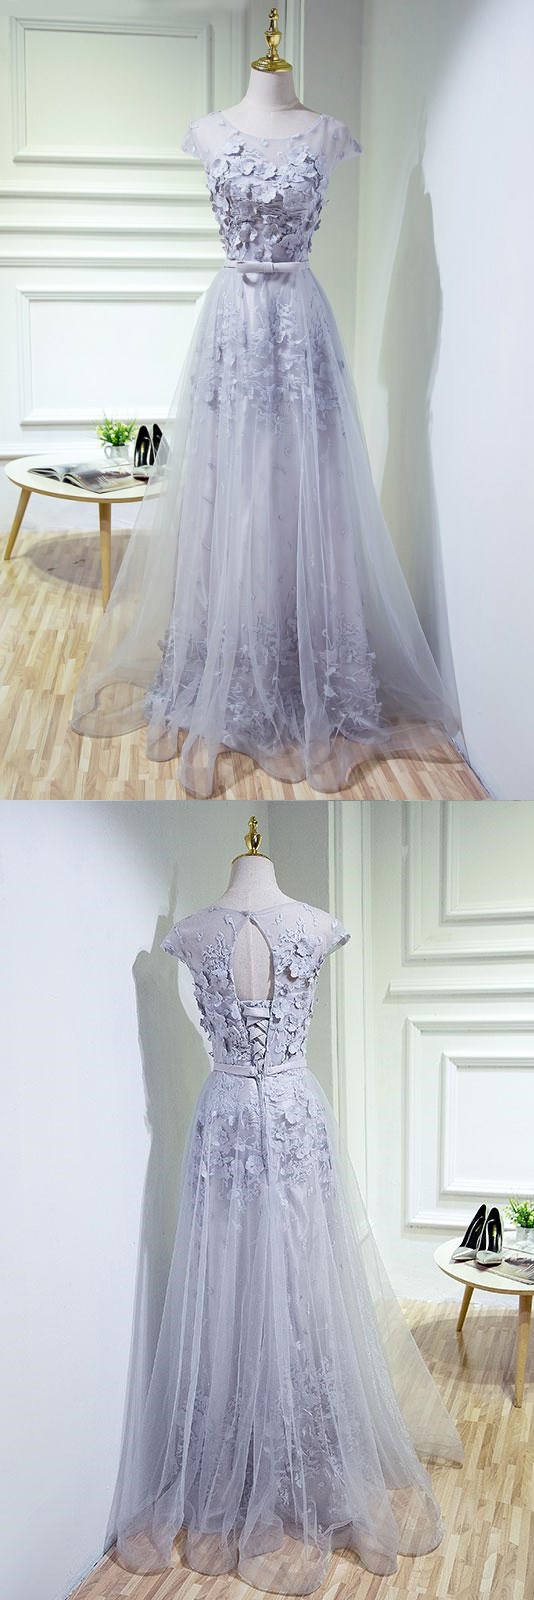 Gray Round Neck Tulle Lace Applique Long Prom Dresses